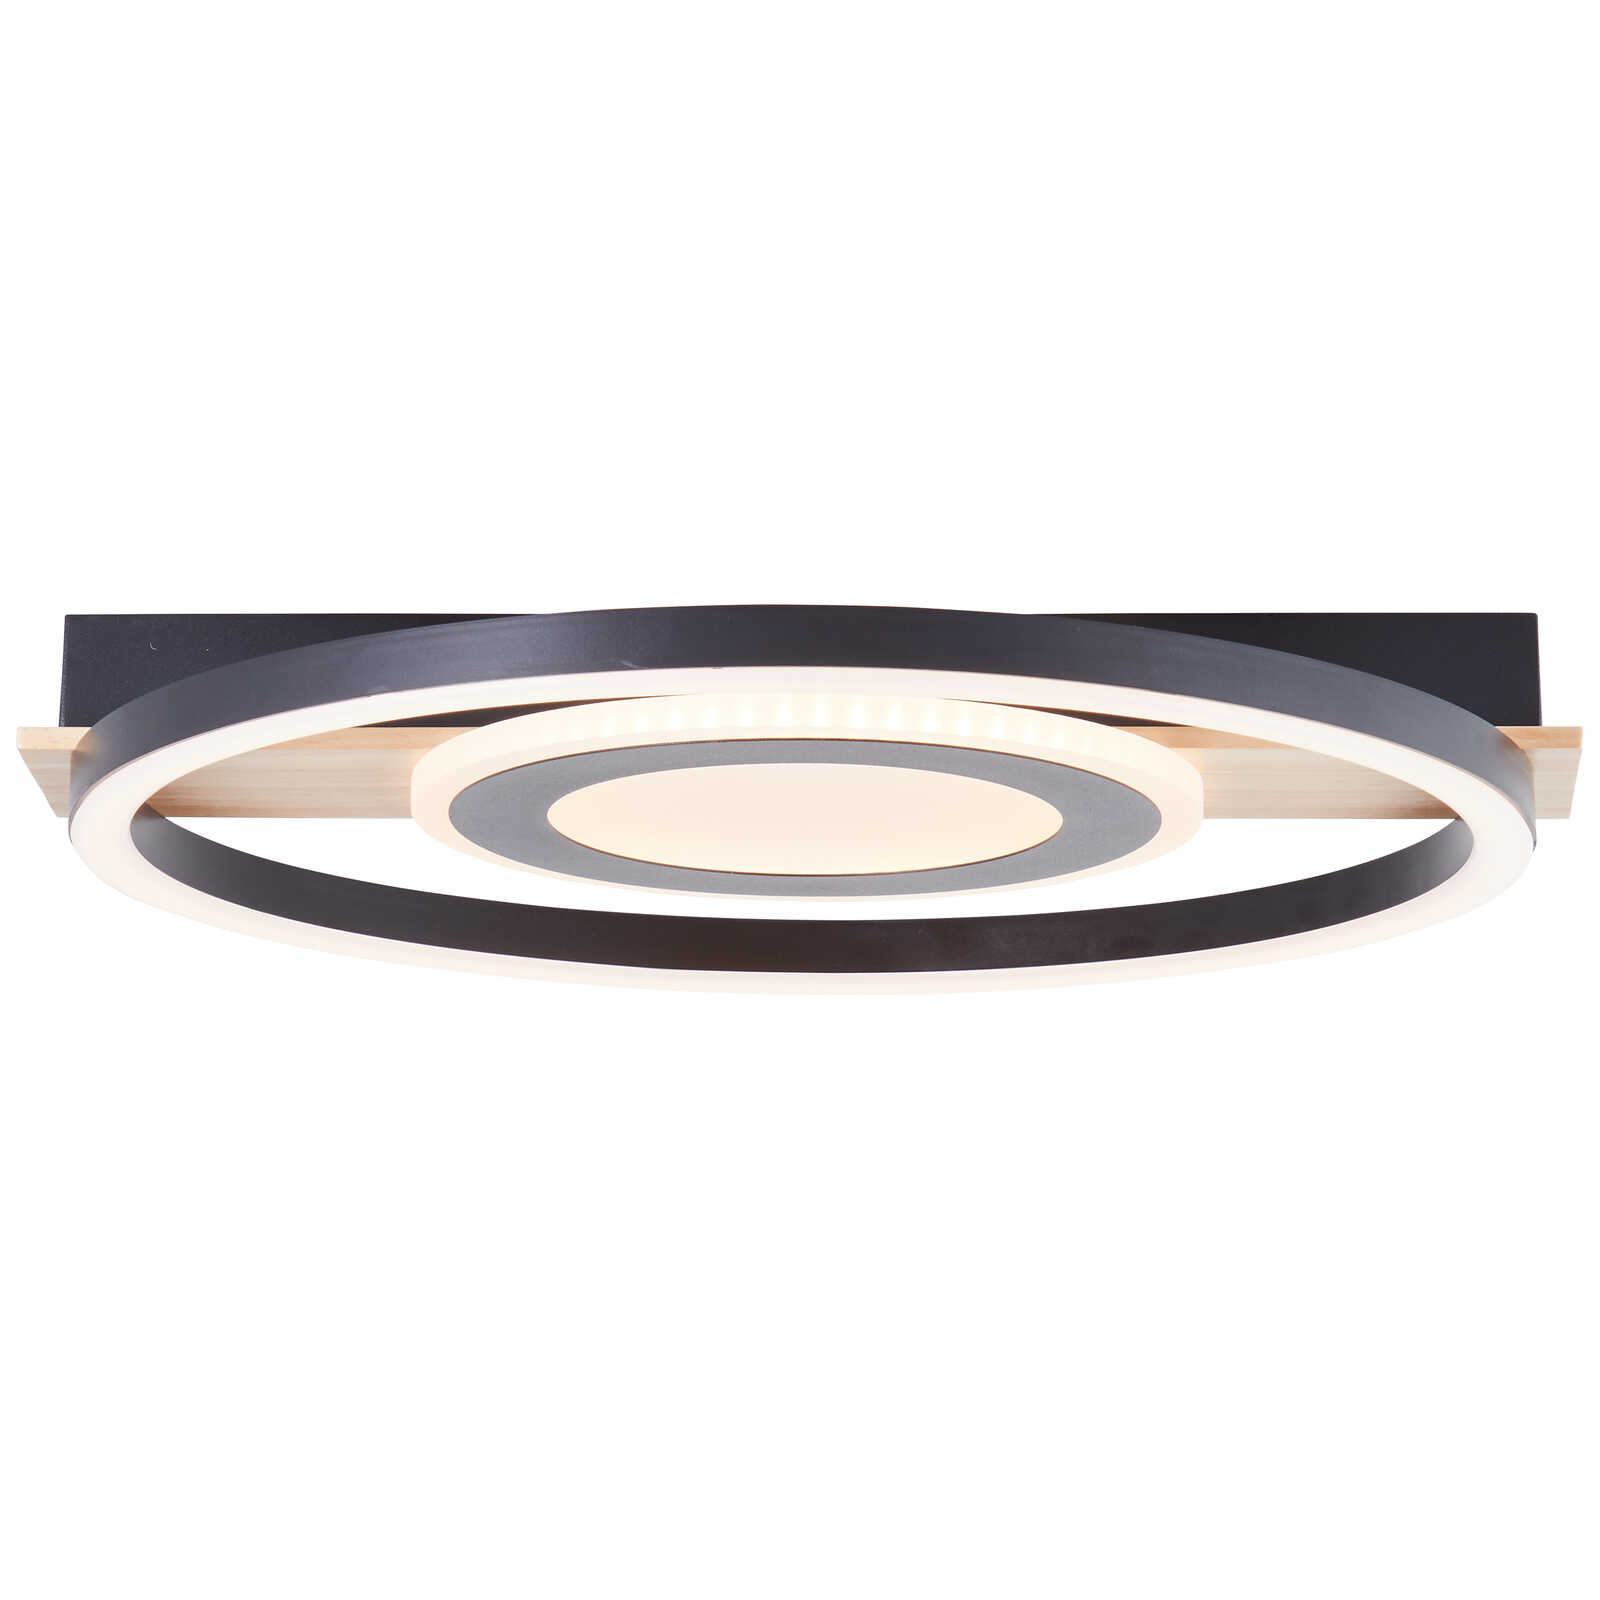             Wooden ceiling light - Leopold 2 - Brown
        